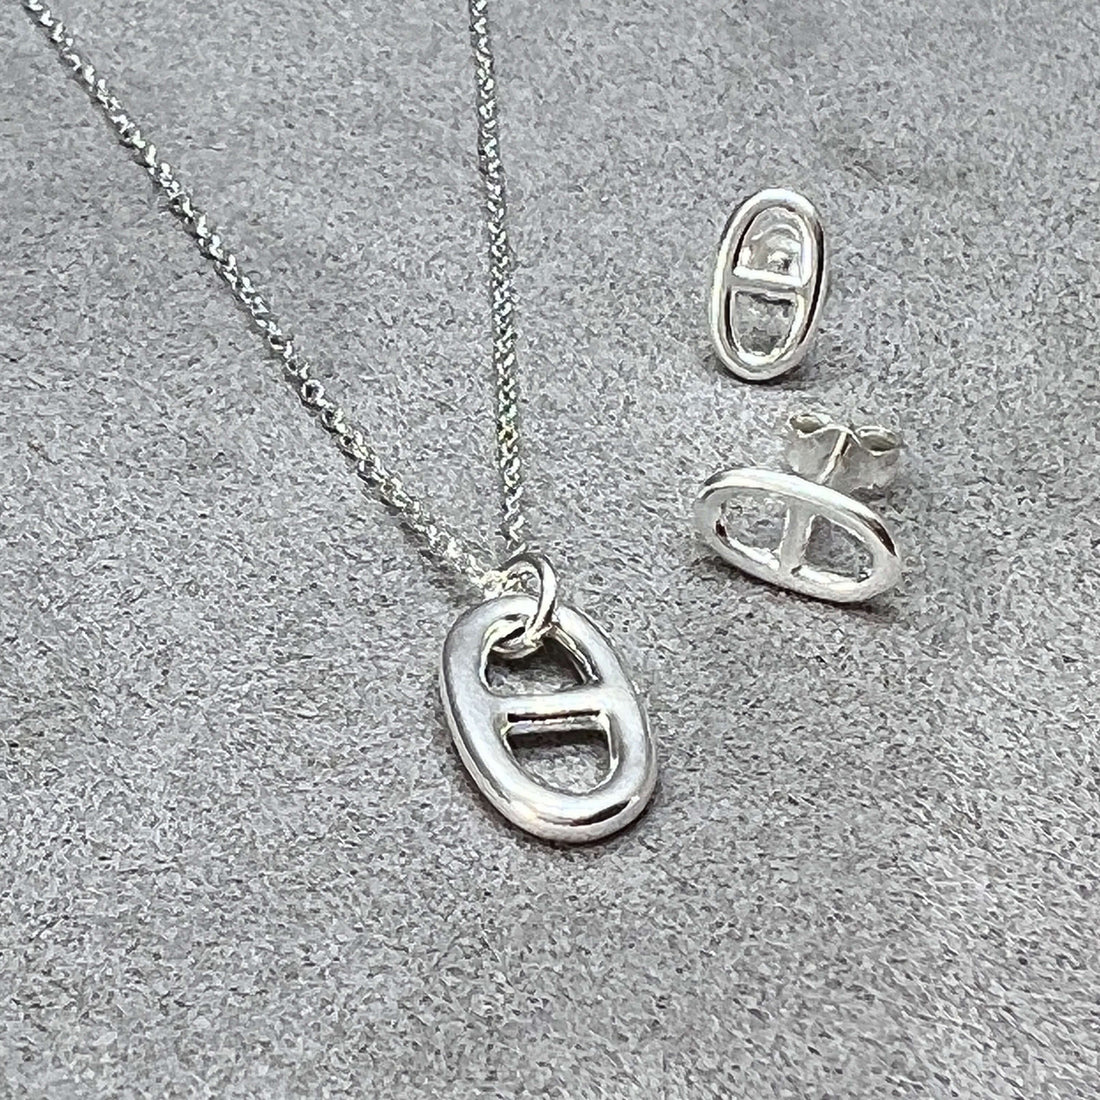 Hidden Symbolism - The Anchor Link Charm In Jewellery blog post cover image featuring a sterling silver mariner link pendant and earrings on a grey suede background from twelve silver trees jewellery and gifts